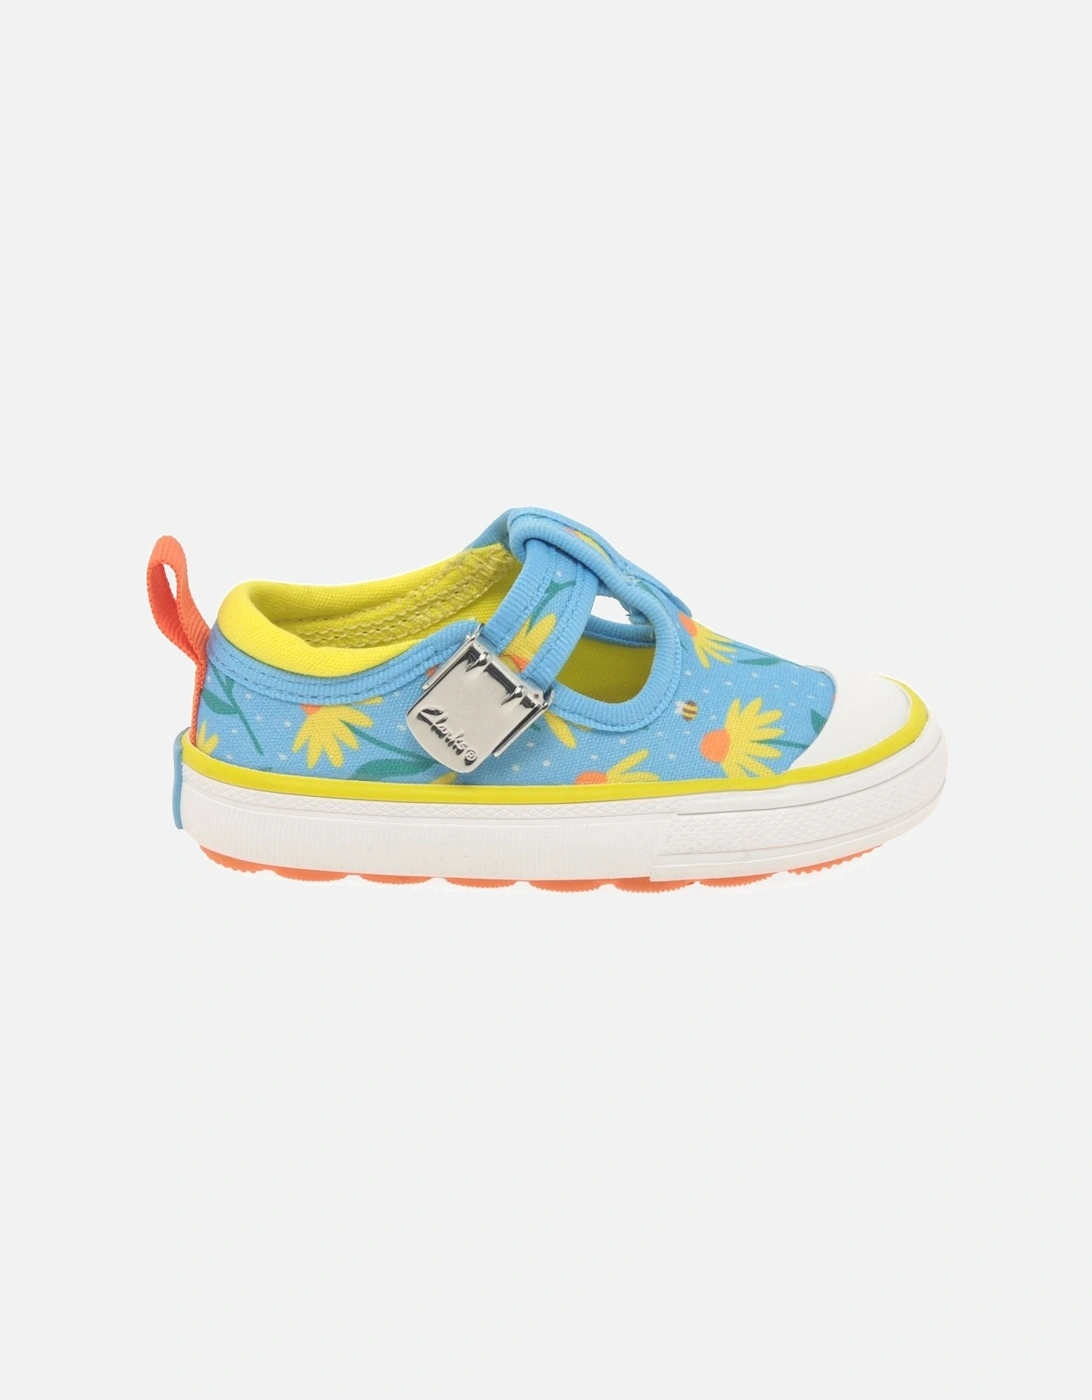 Foxing Bloom T Girls Infant Canvas Shoes